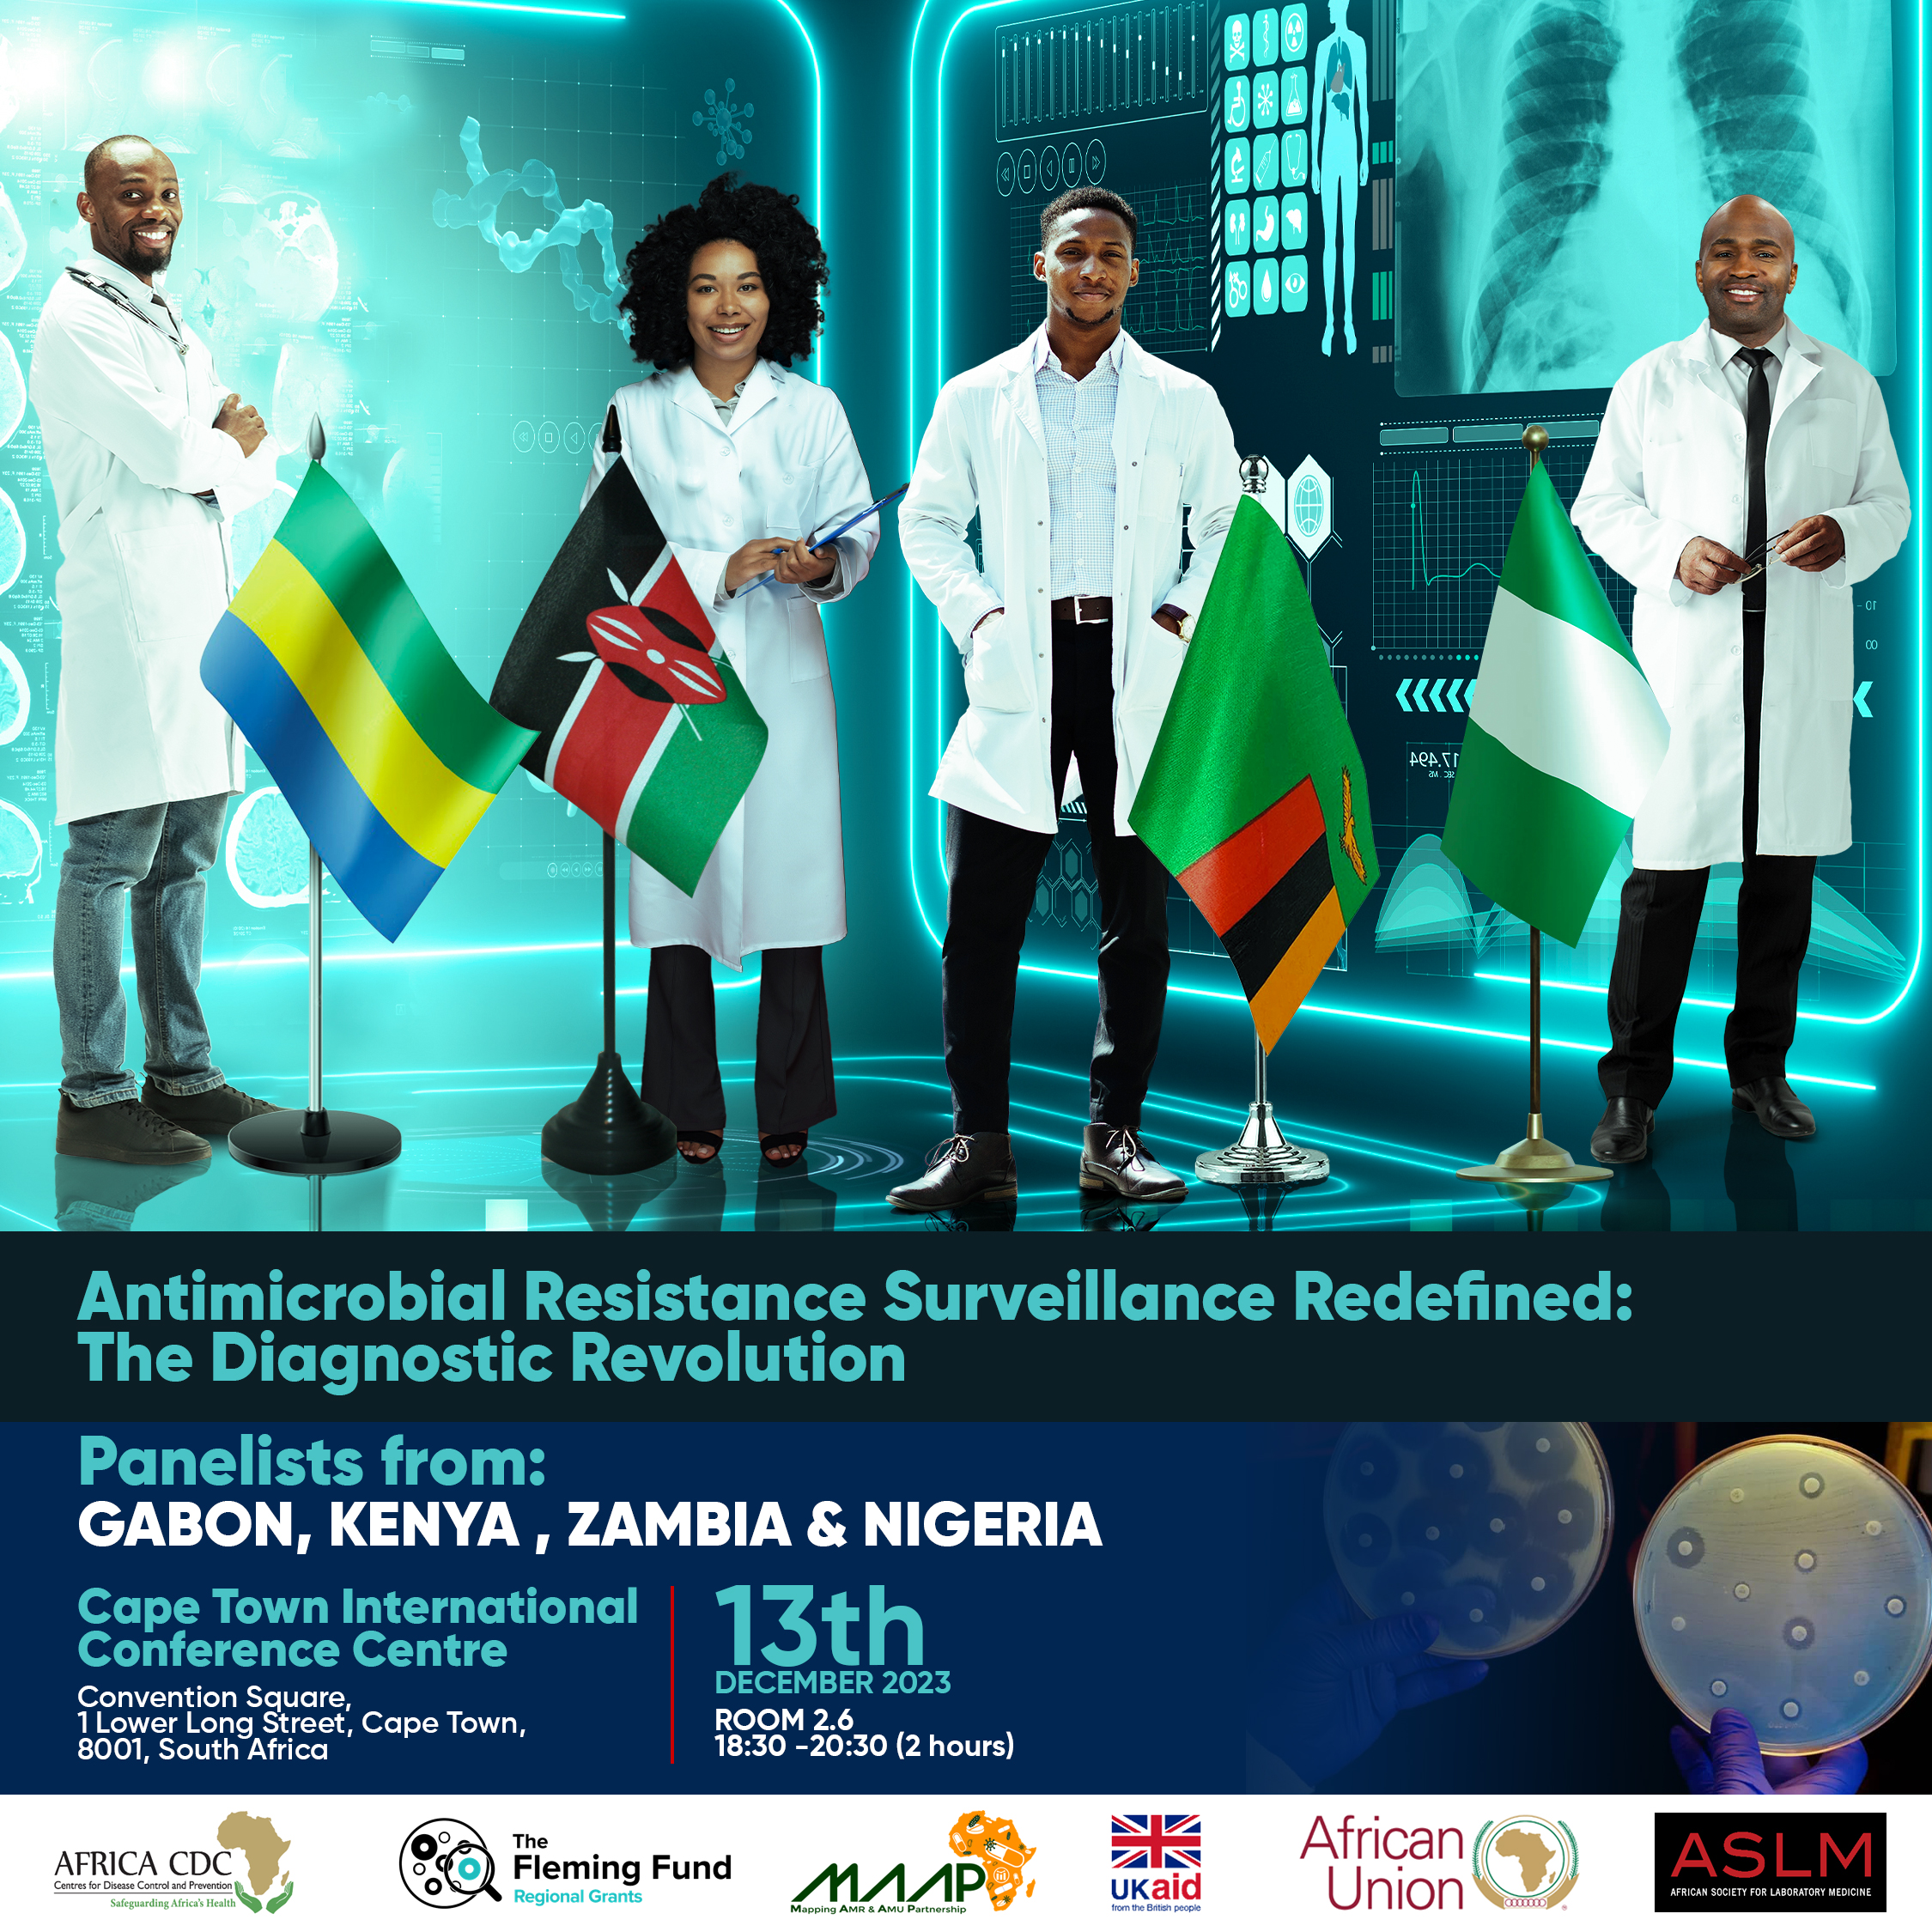 As part of the ASLM conference 2023, the Fleming Fund supported session: 'Antimicrobial Resistance Surveillance Redefined; The Diagnostic Revolution', partnering with Africa CDC.